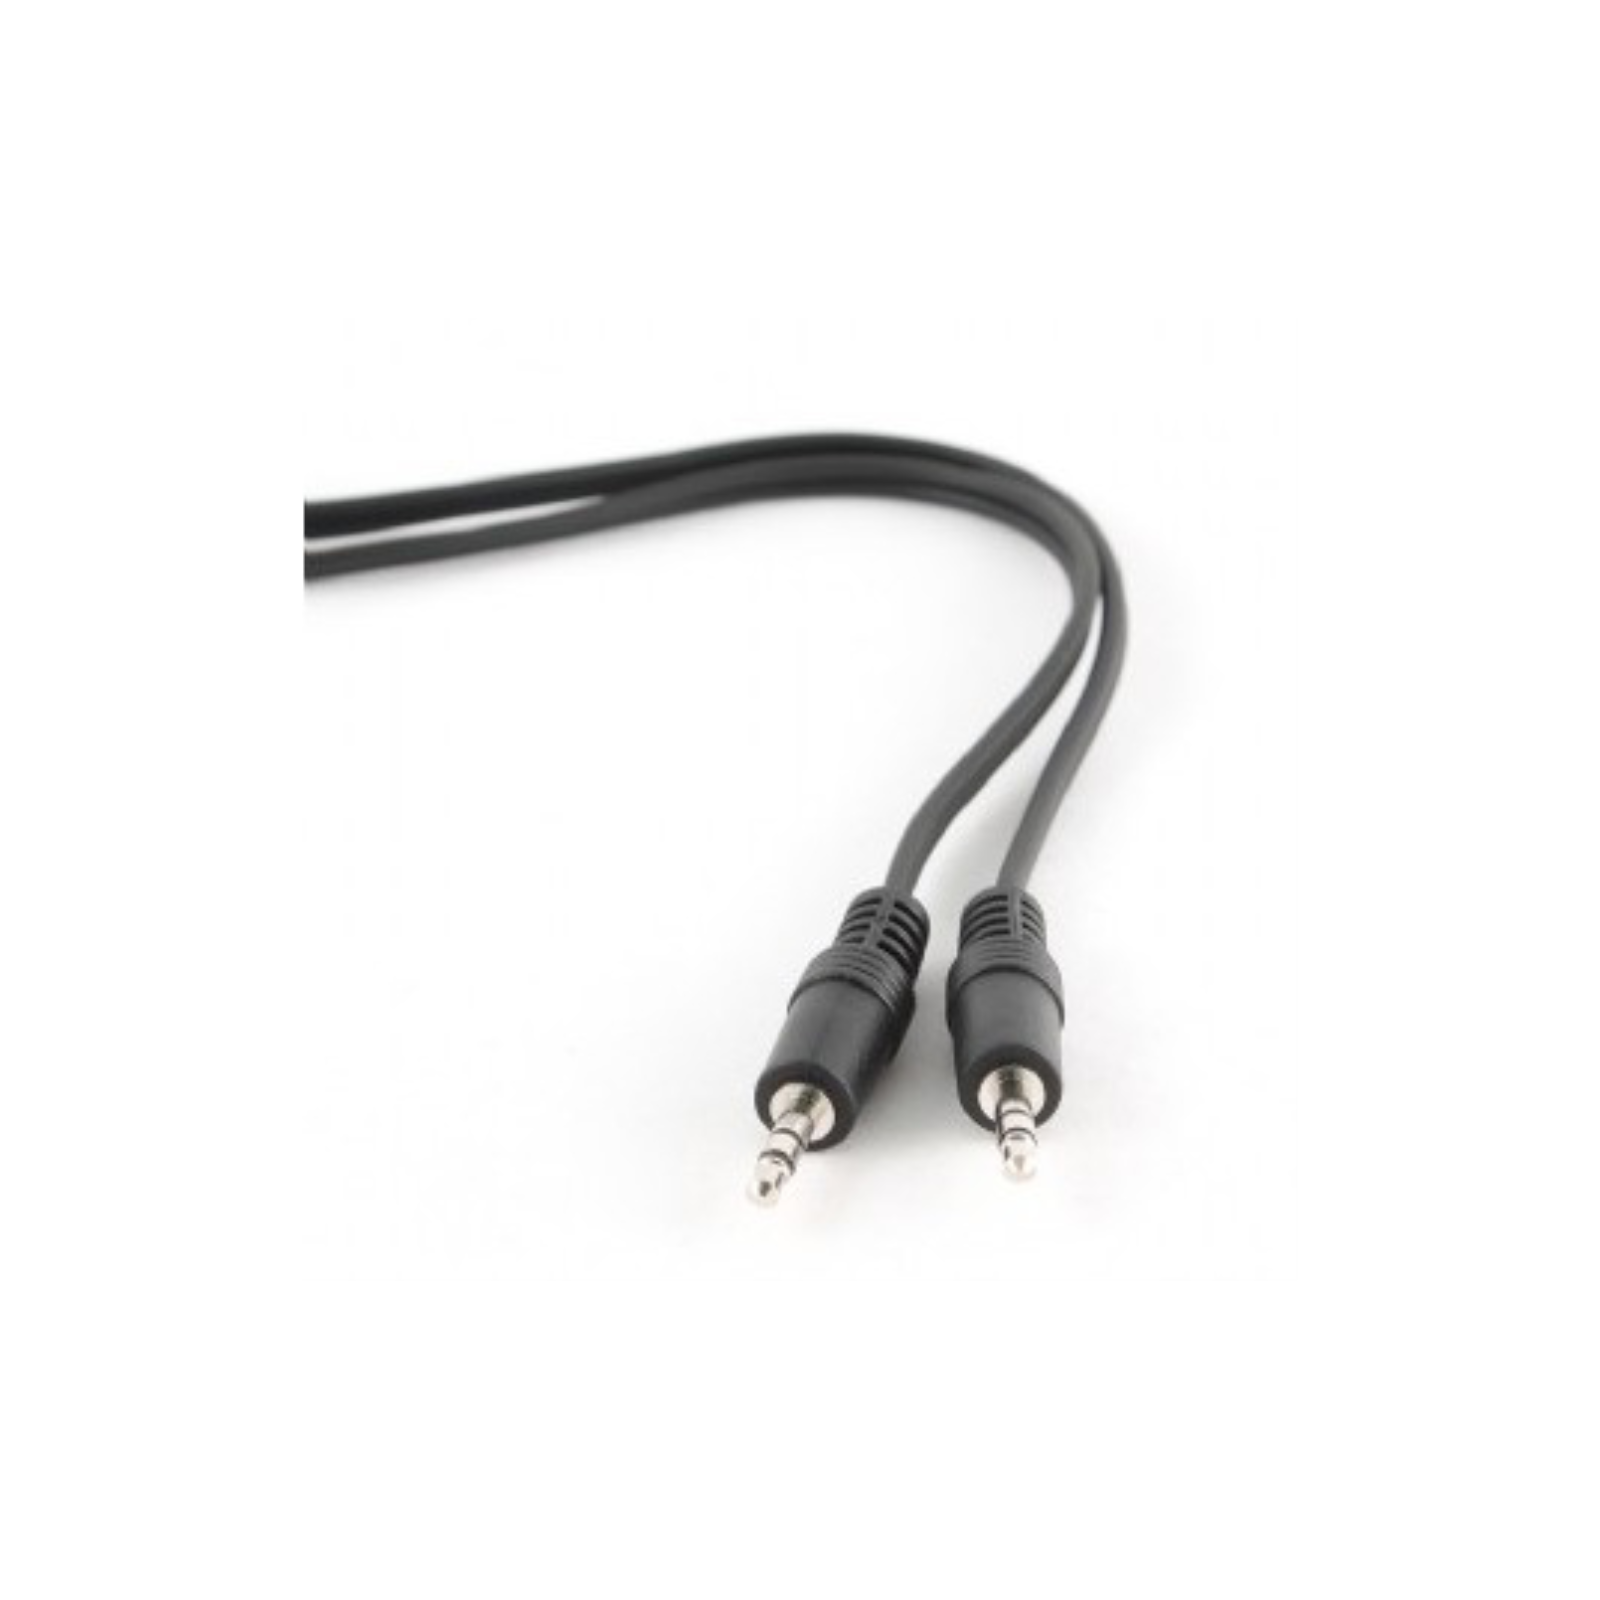 CABLE AUDIO GEMBIRD CONECTOR 35MM 5M